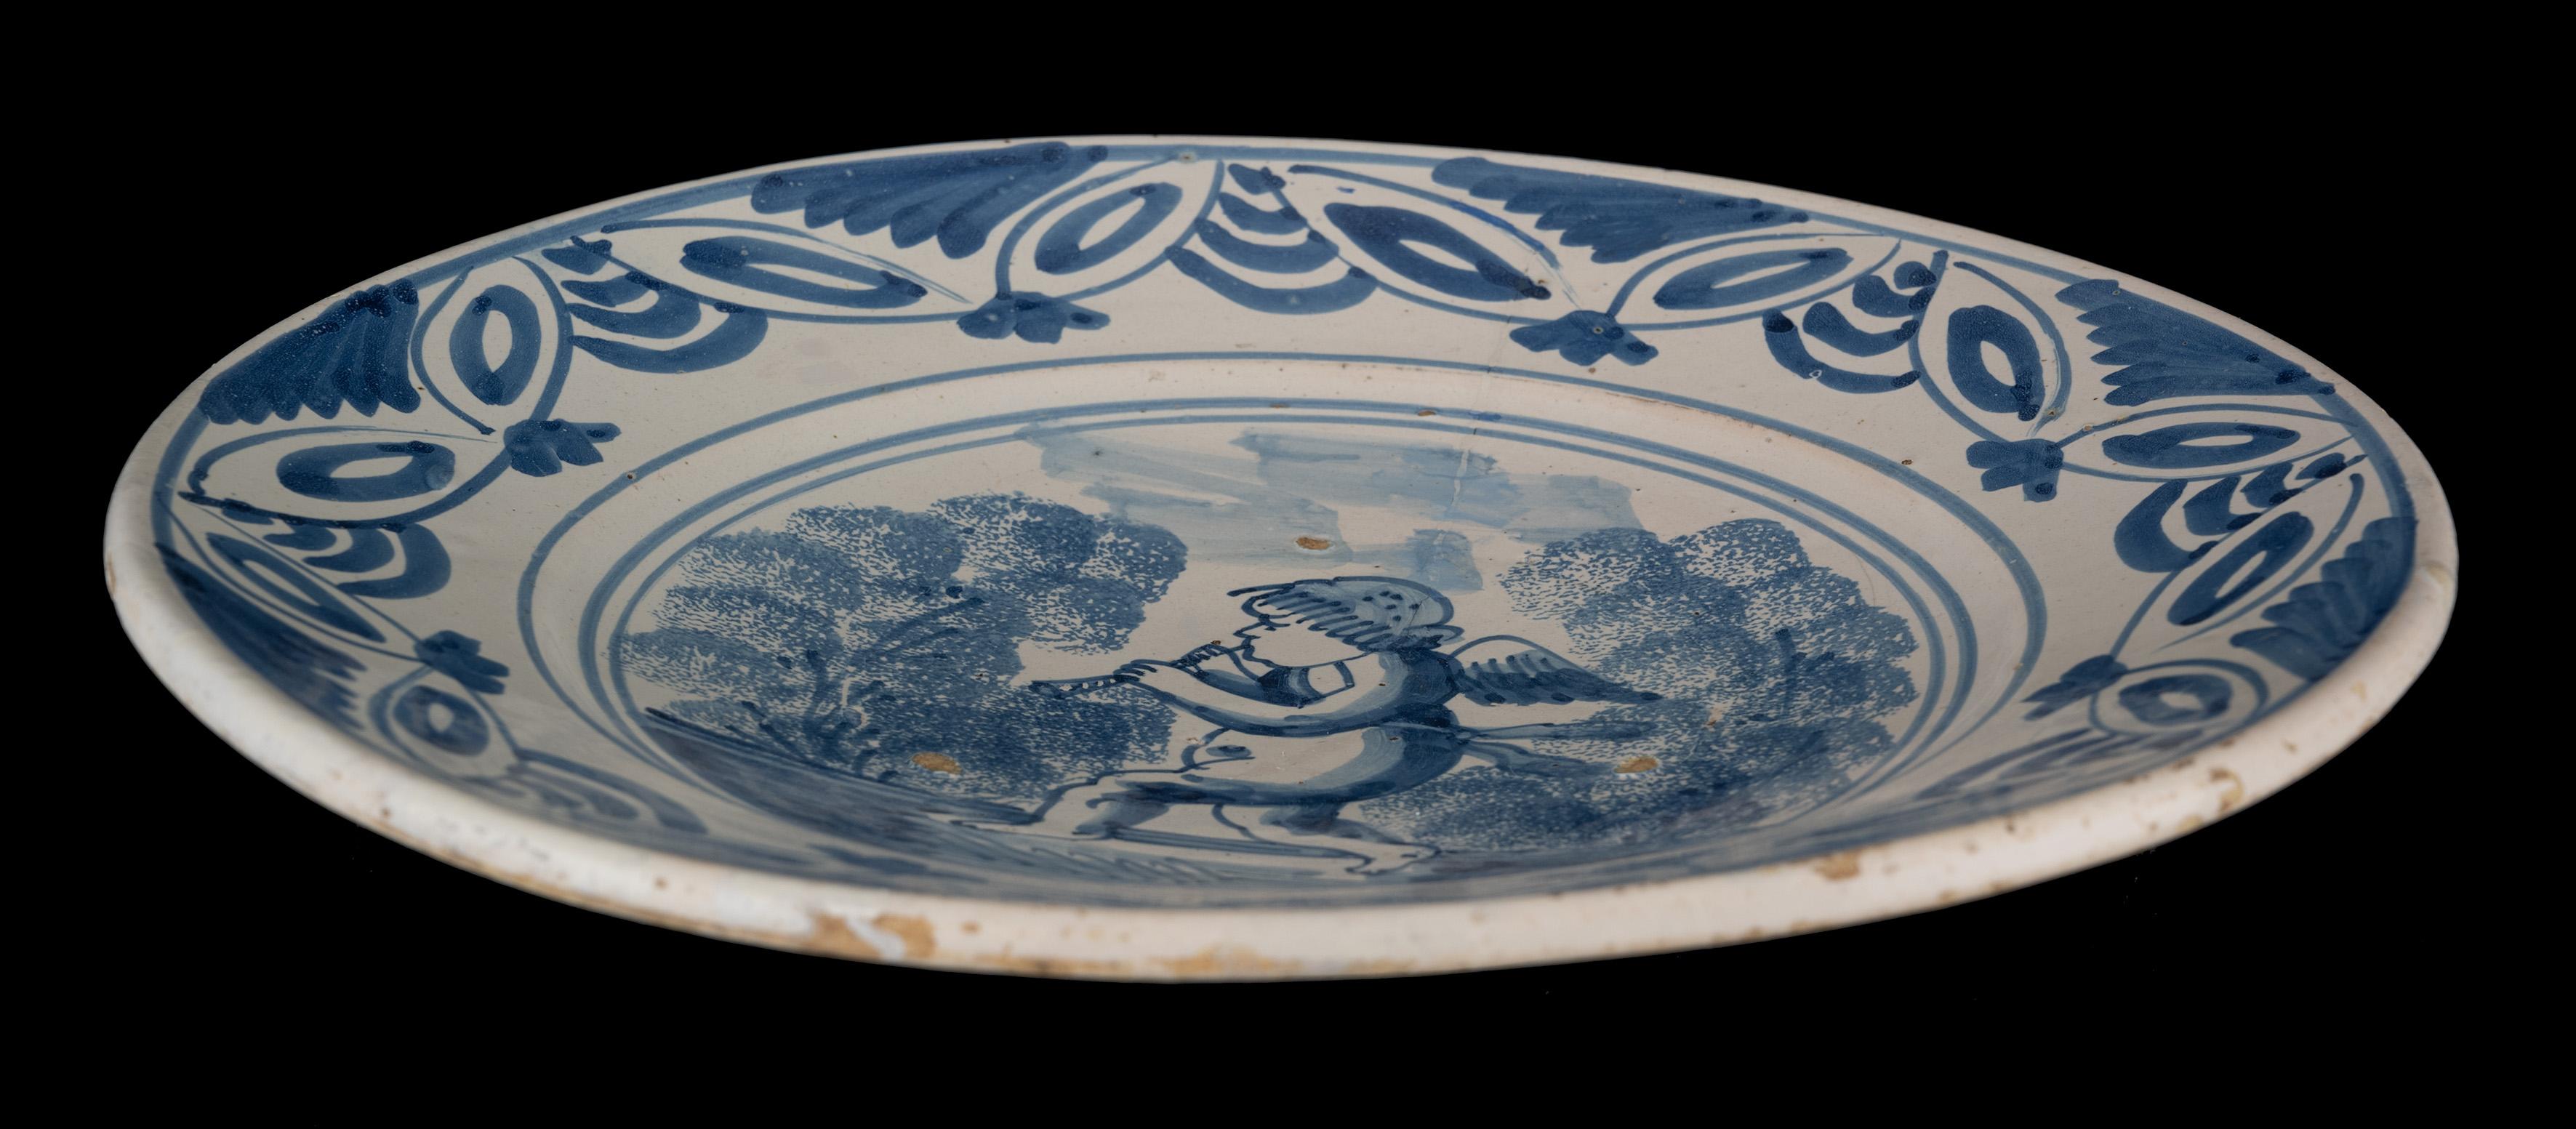 Delft Blue and White Dish with a Flute-Playing Putto, the Netherlands, 1660-1700 For Sale 2